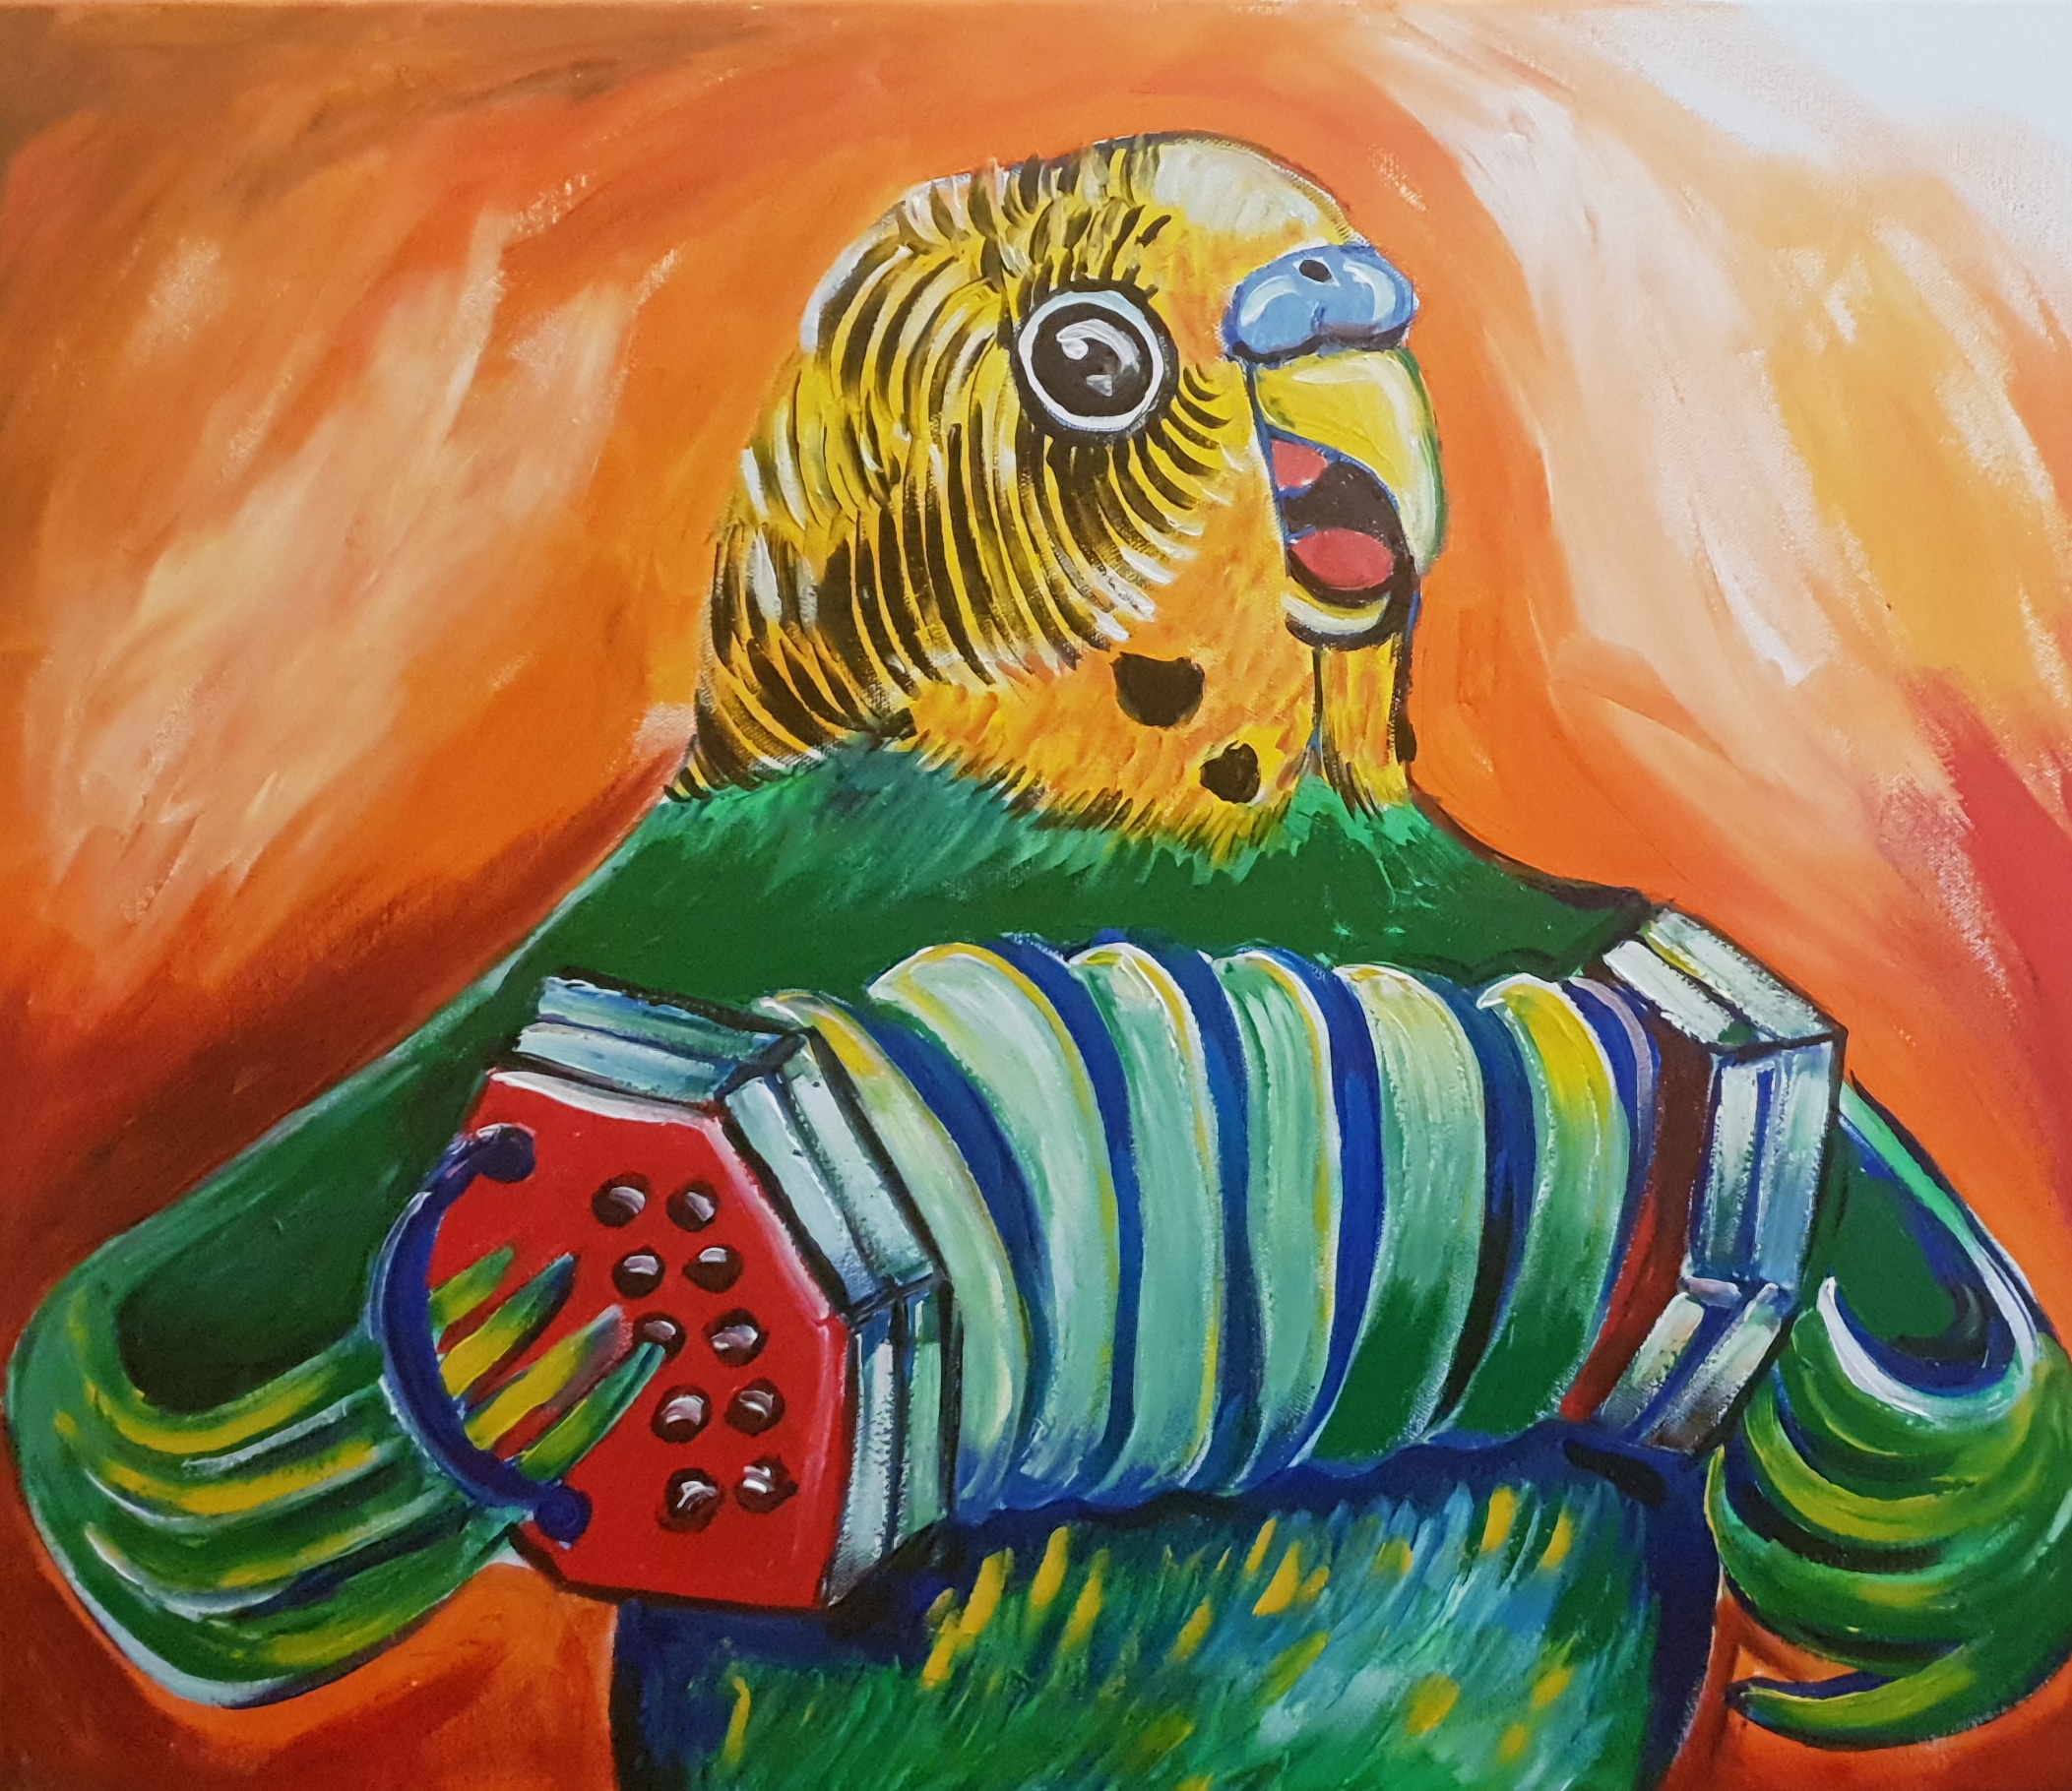 Concertina Budgie by Lucy Car | Lethbridge 20000 2021 Finalists | Lethbridge Gallery